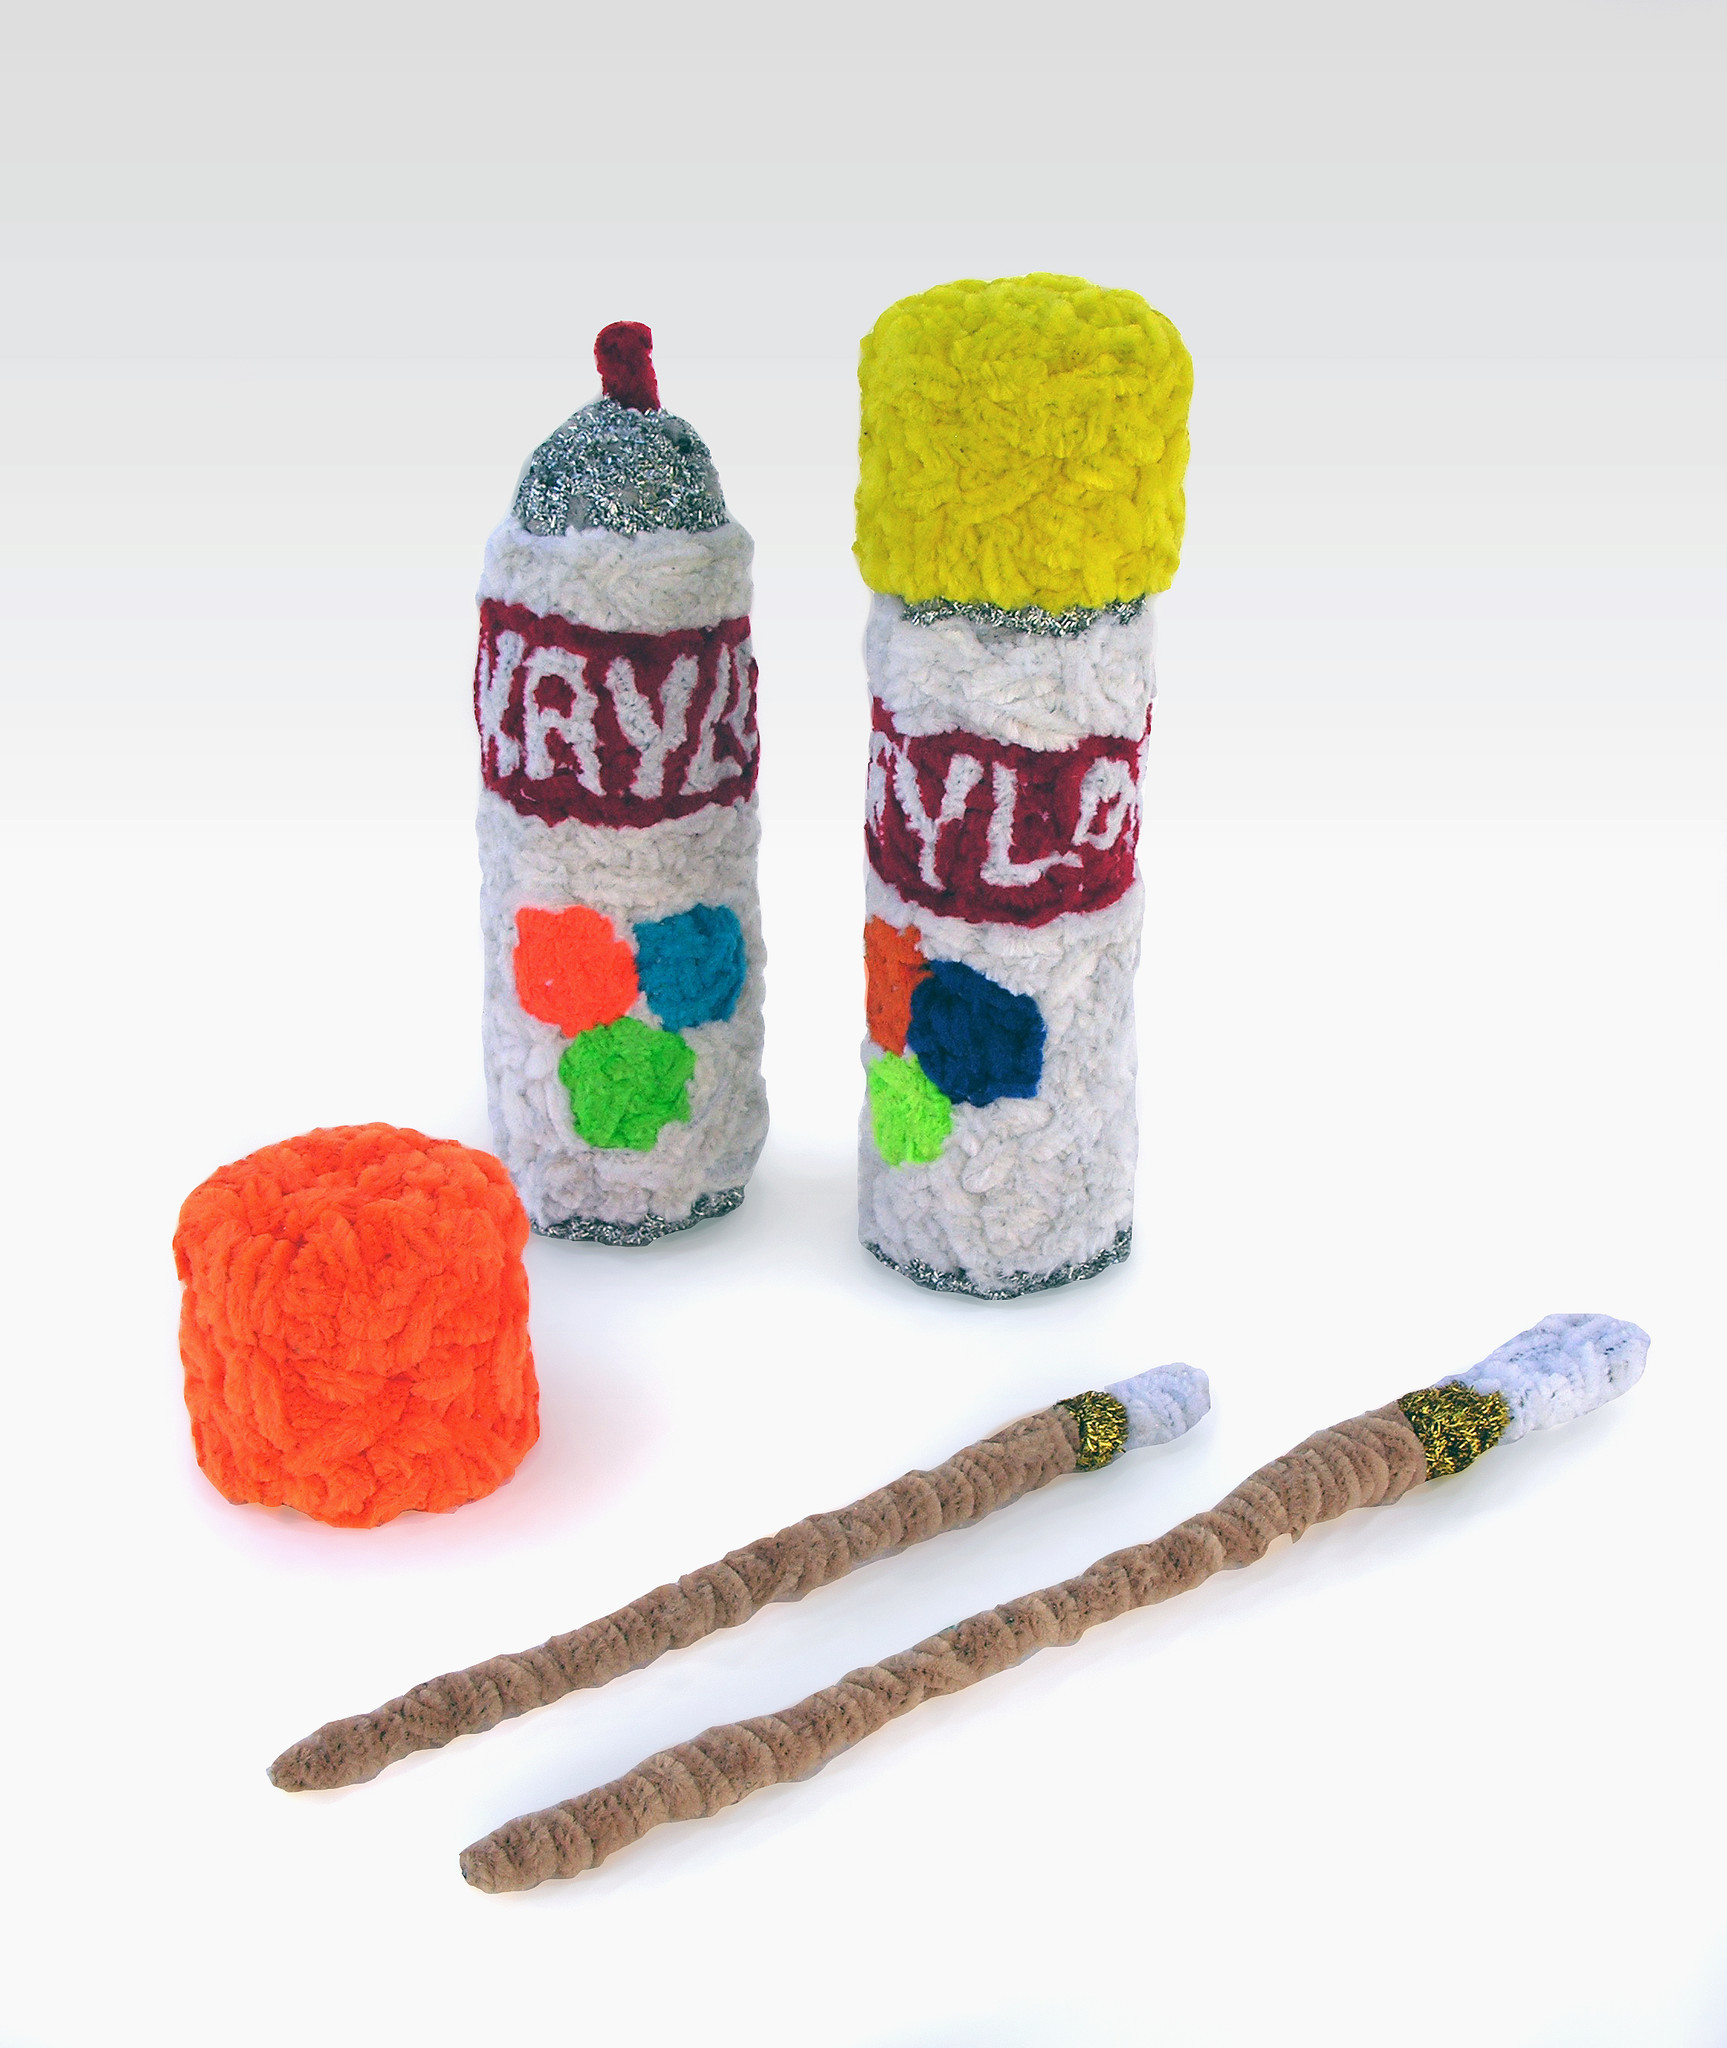 Common objects crafted from pipe cleaners by Don Porcella for the artist's exhibition 